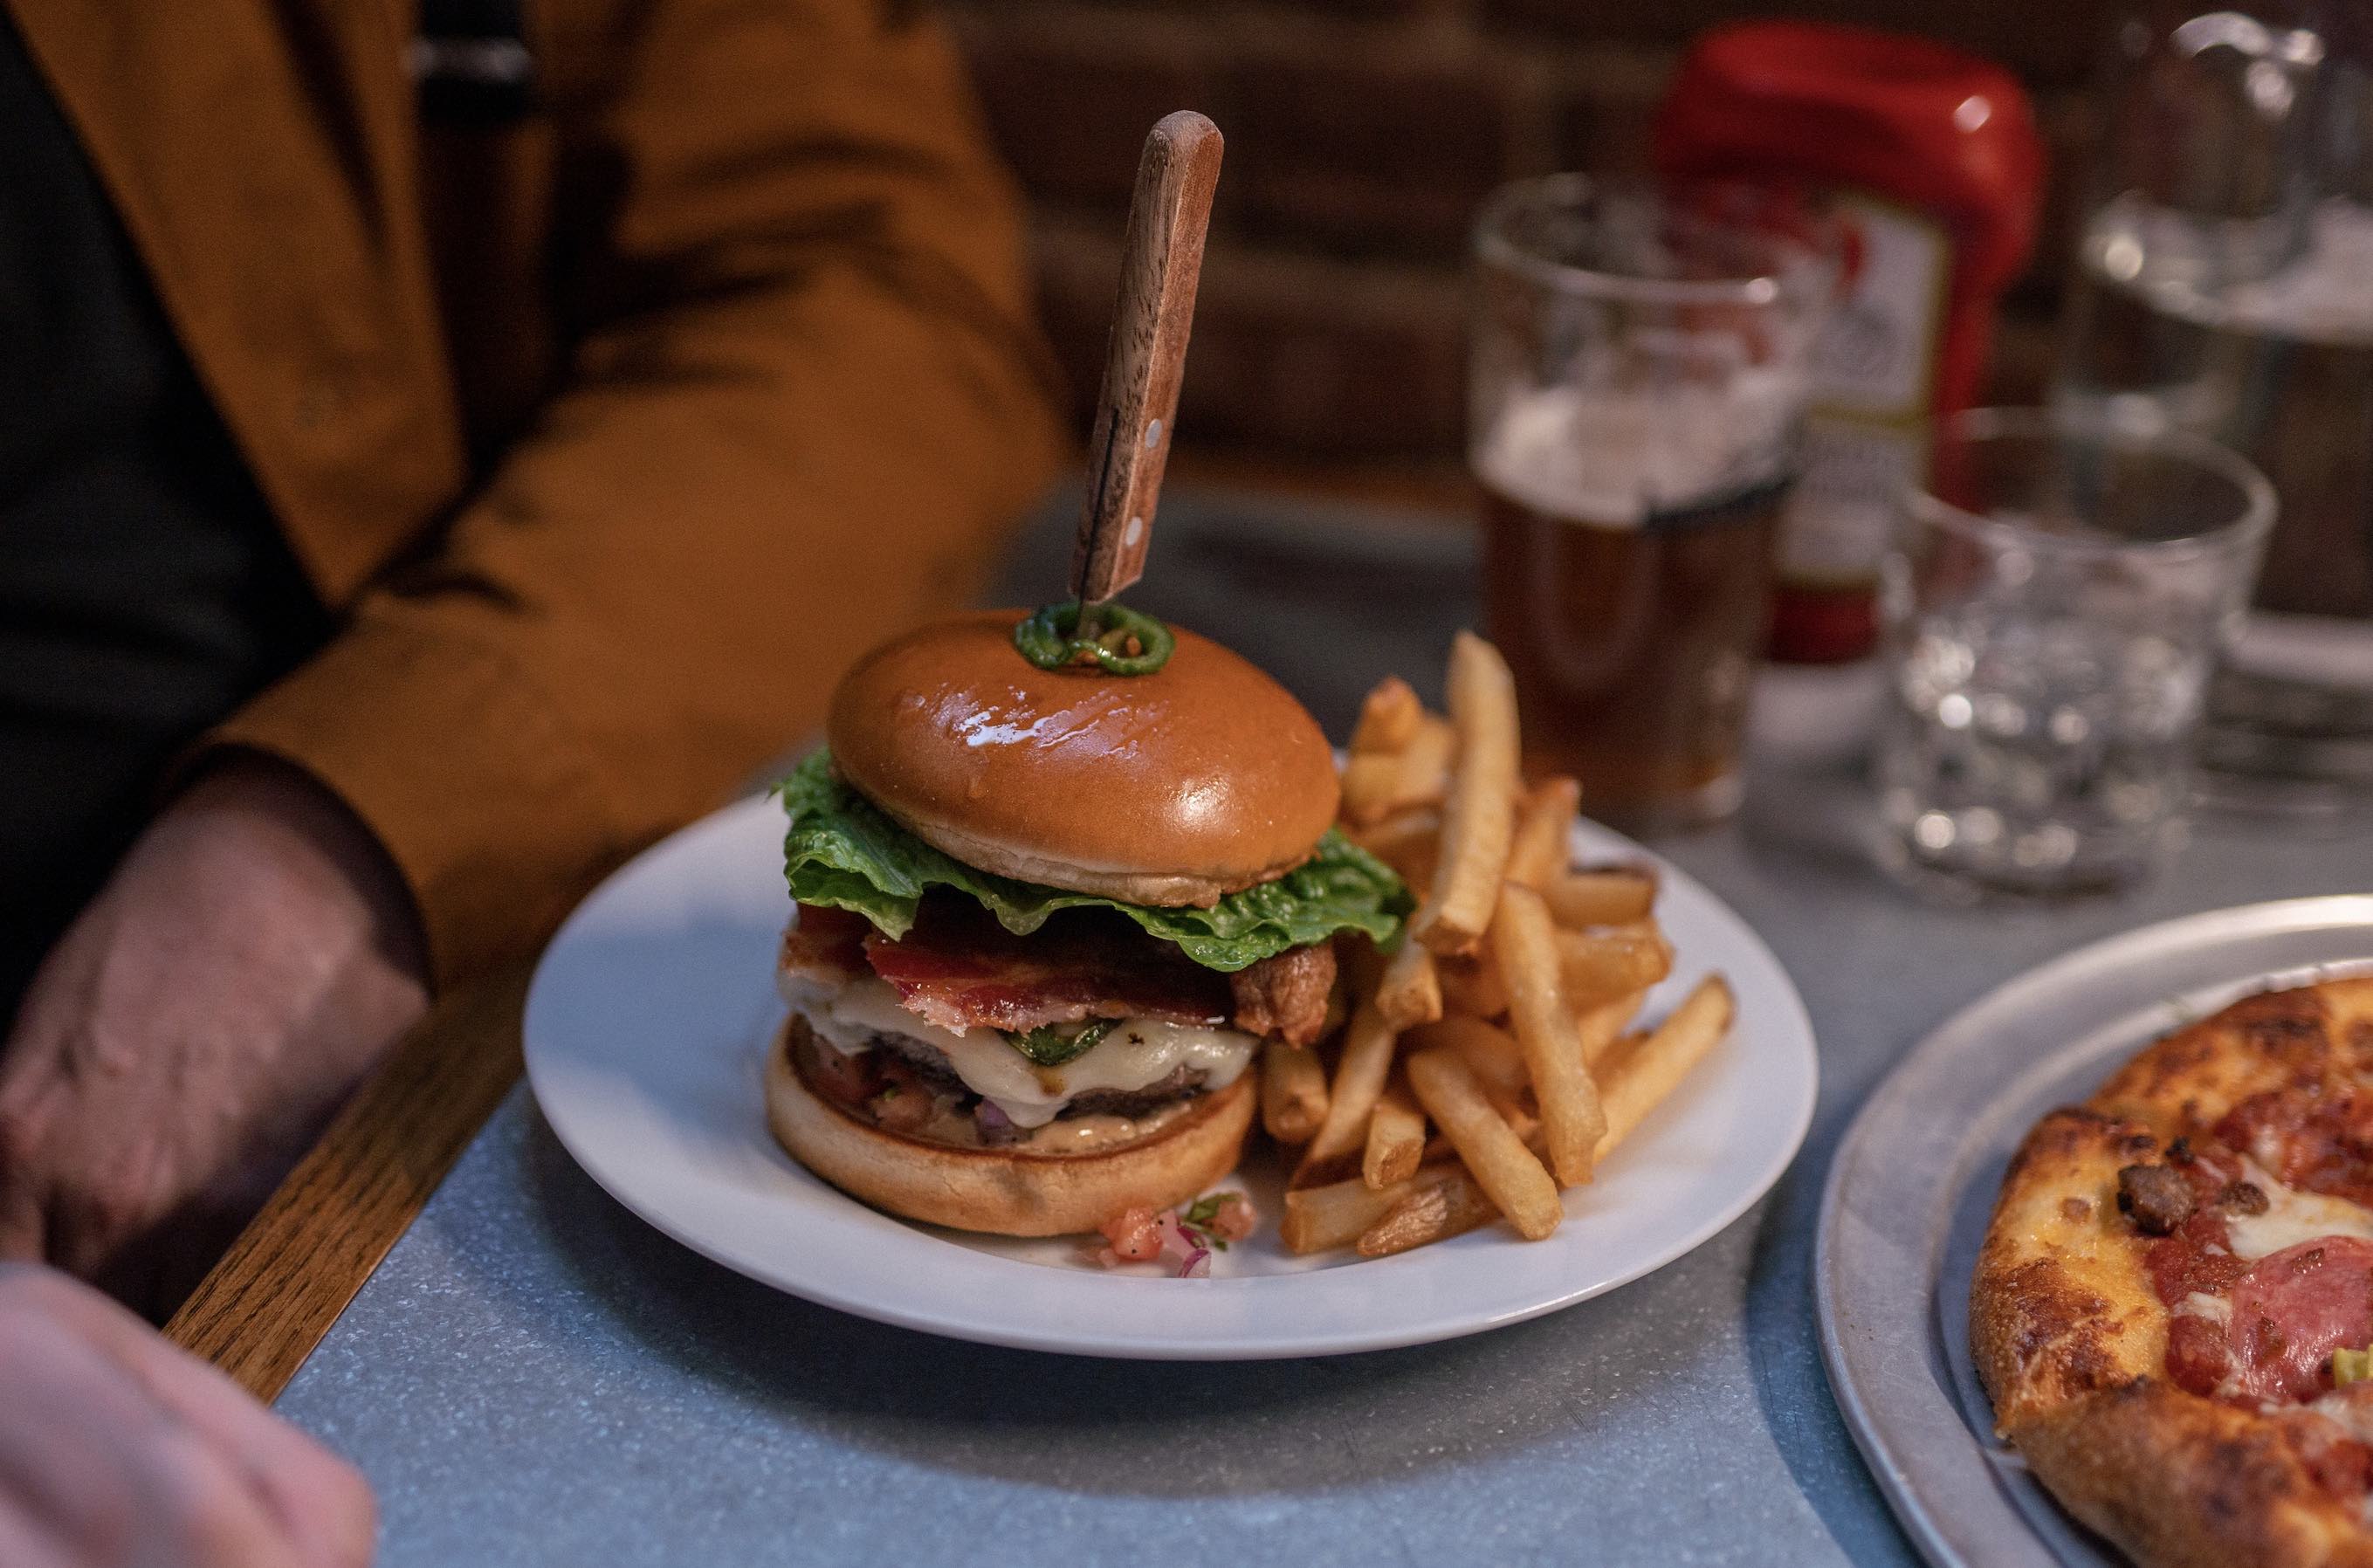 There is a large burger and fries, stacked with ingredients and a knife through the top